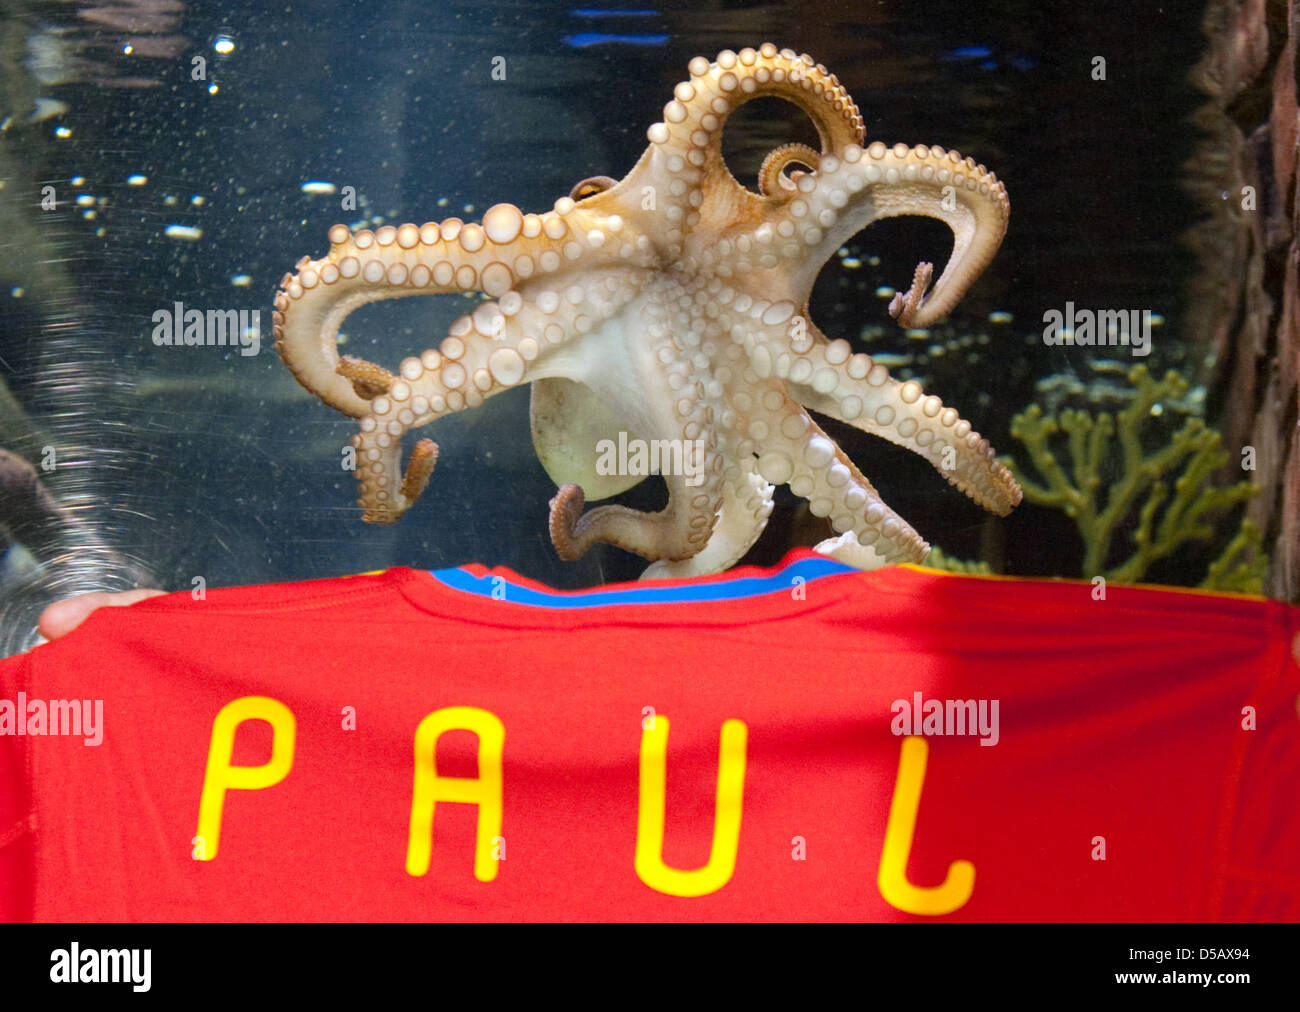 A spanish national team jersey is held up before Paul the octopus's tank at the Sea Life Center in Oberhausen, Germany, 22 July 2010. The octopus had been declared 'favorite friend of the city' earlier by a delegation from the Spanish city of Carballino. Paul had guessed correctly the outcomes of all German games and predicted Spain's victory in the soccer World Cup final. Photo: B Stock Photo